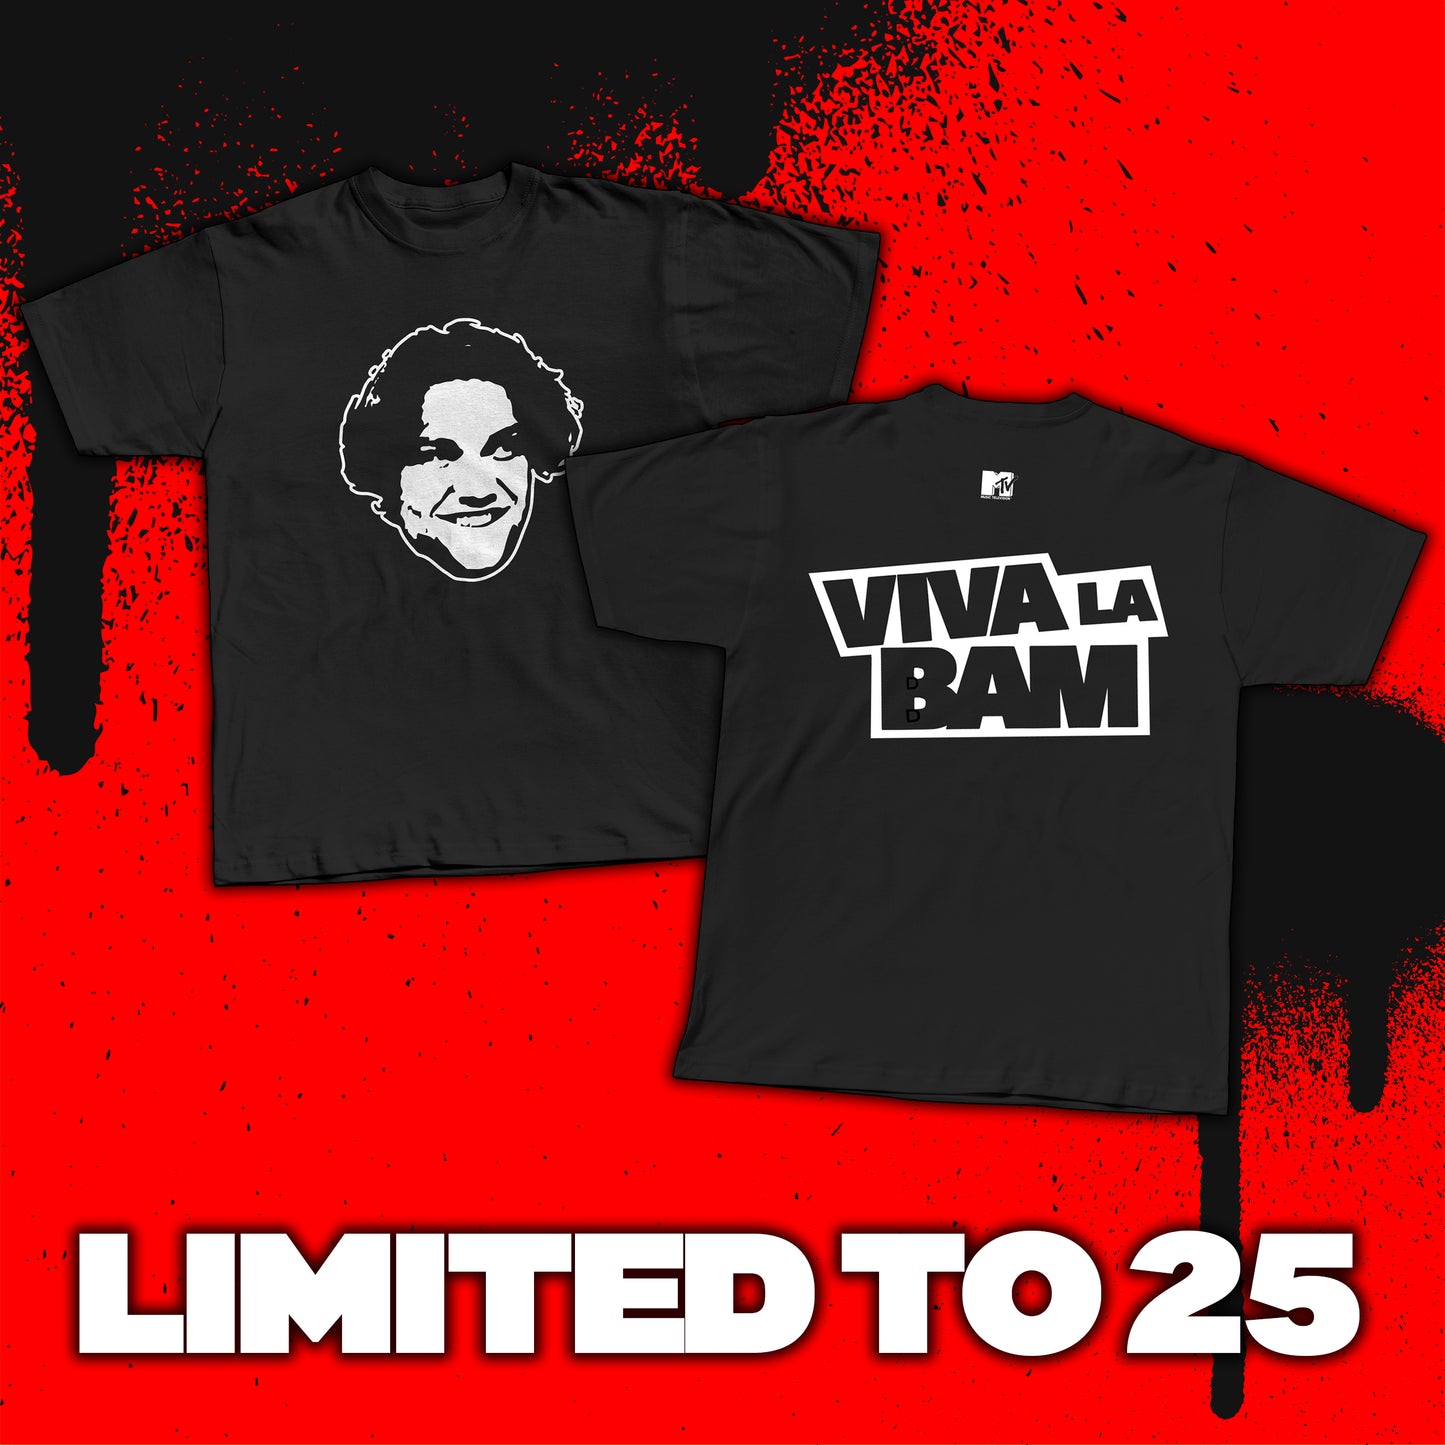 VLB: BAM FACE - Shirt *LIMITED TO 25*